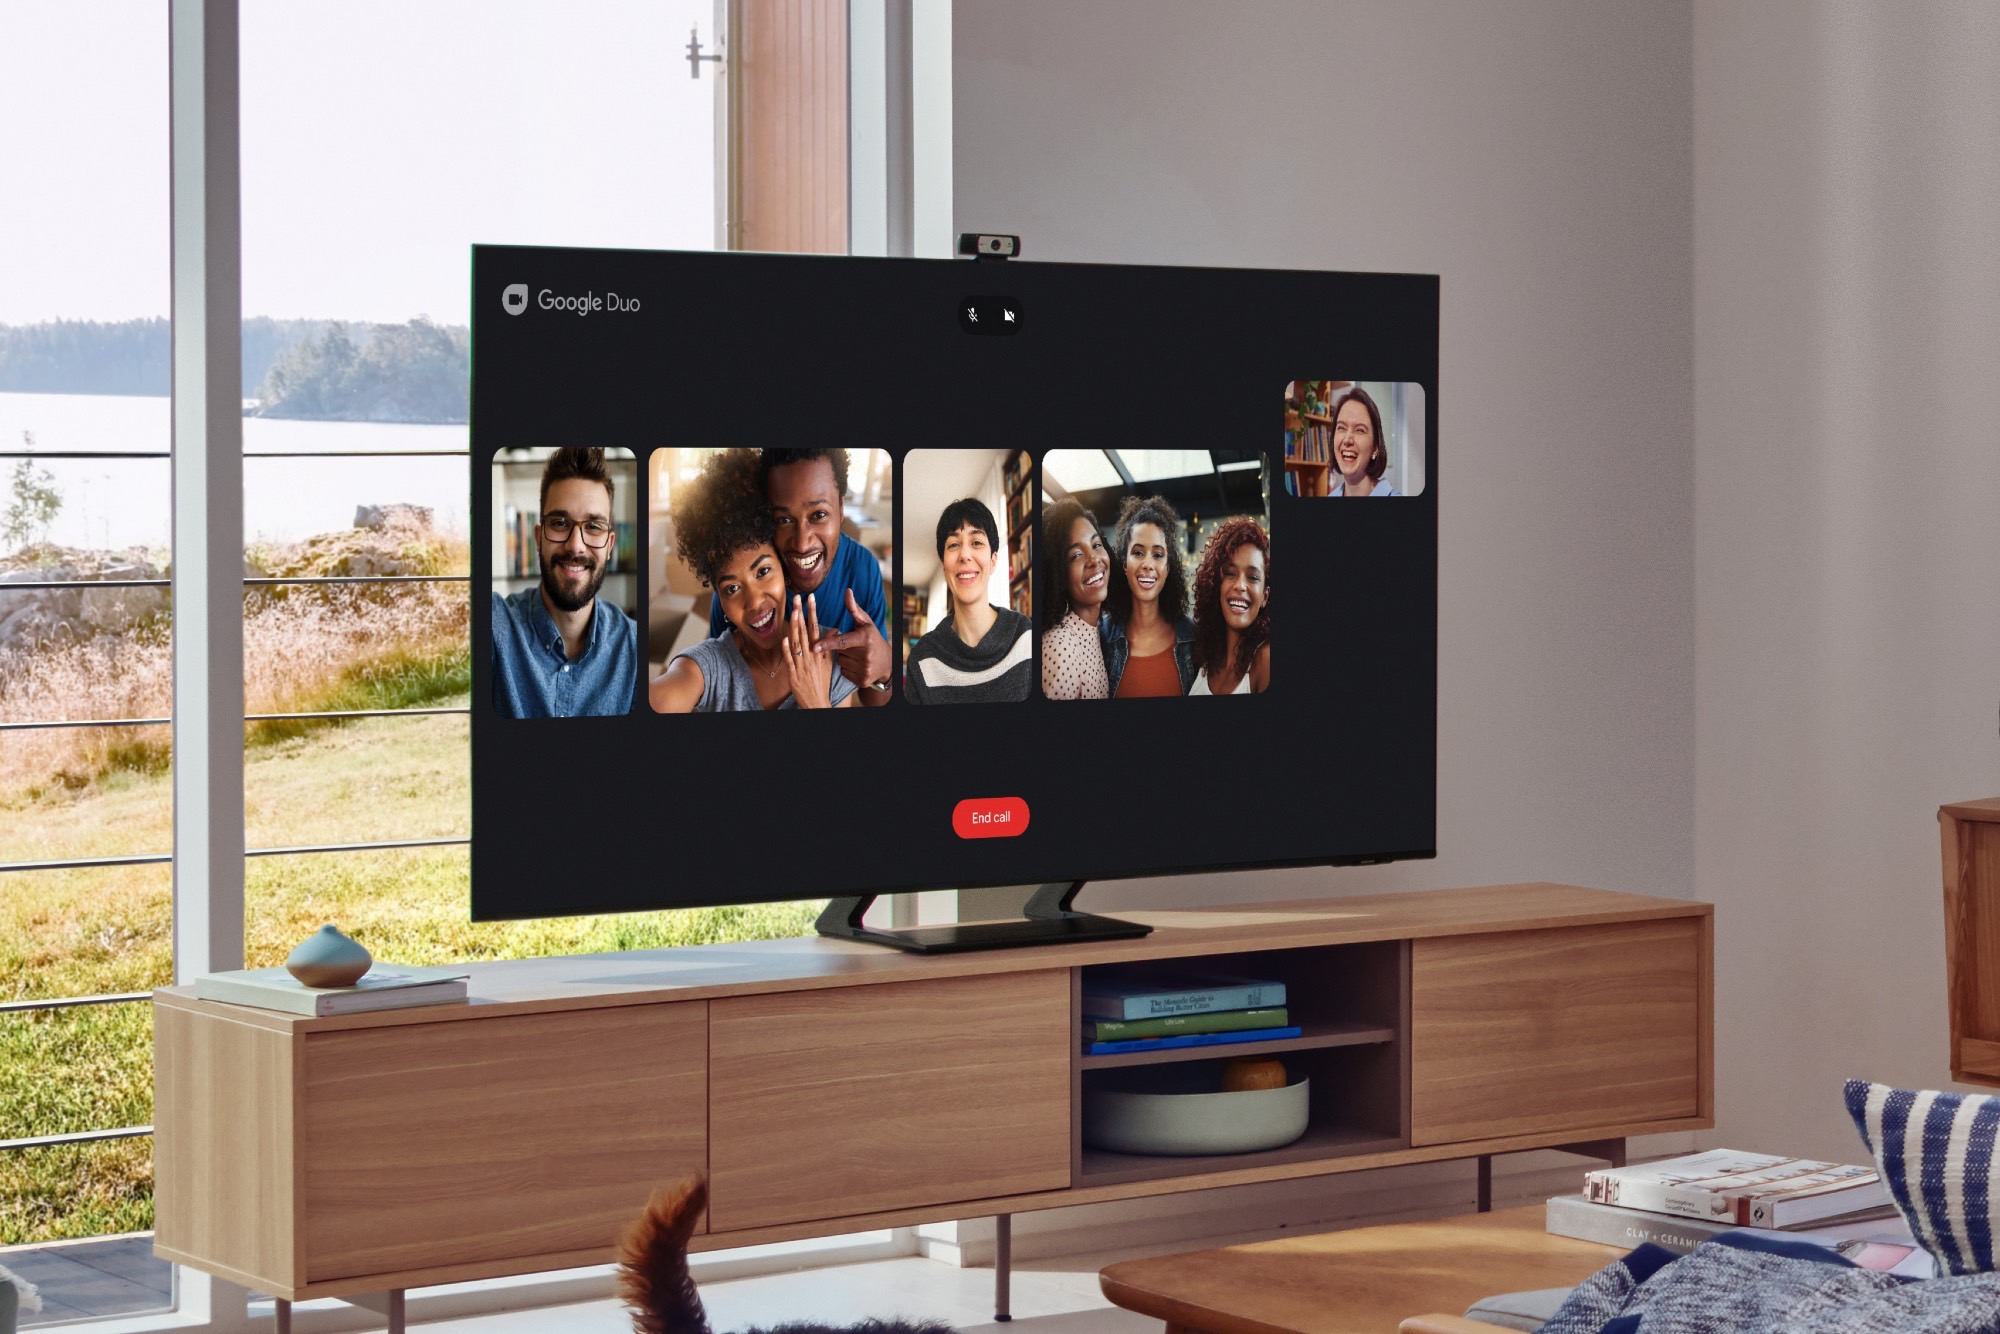 2021 Samsung 4K Neo QLED TV with Google Duo